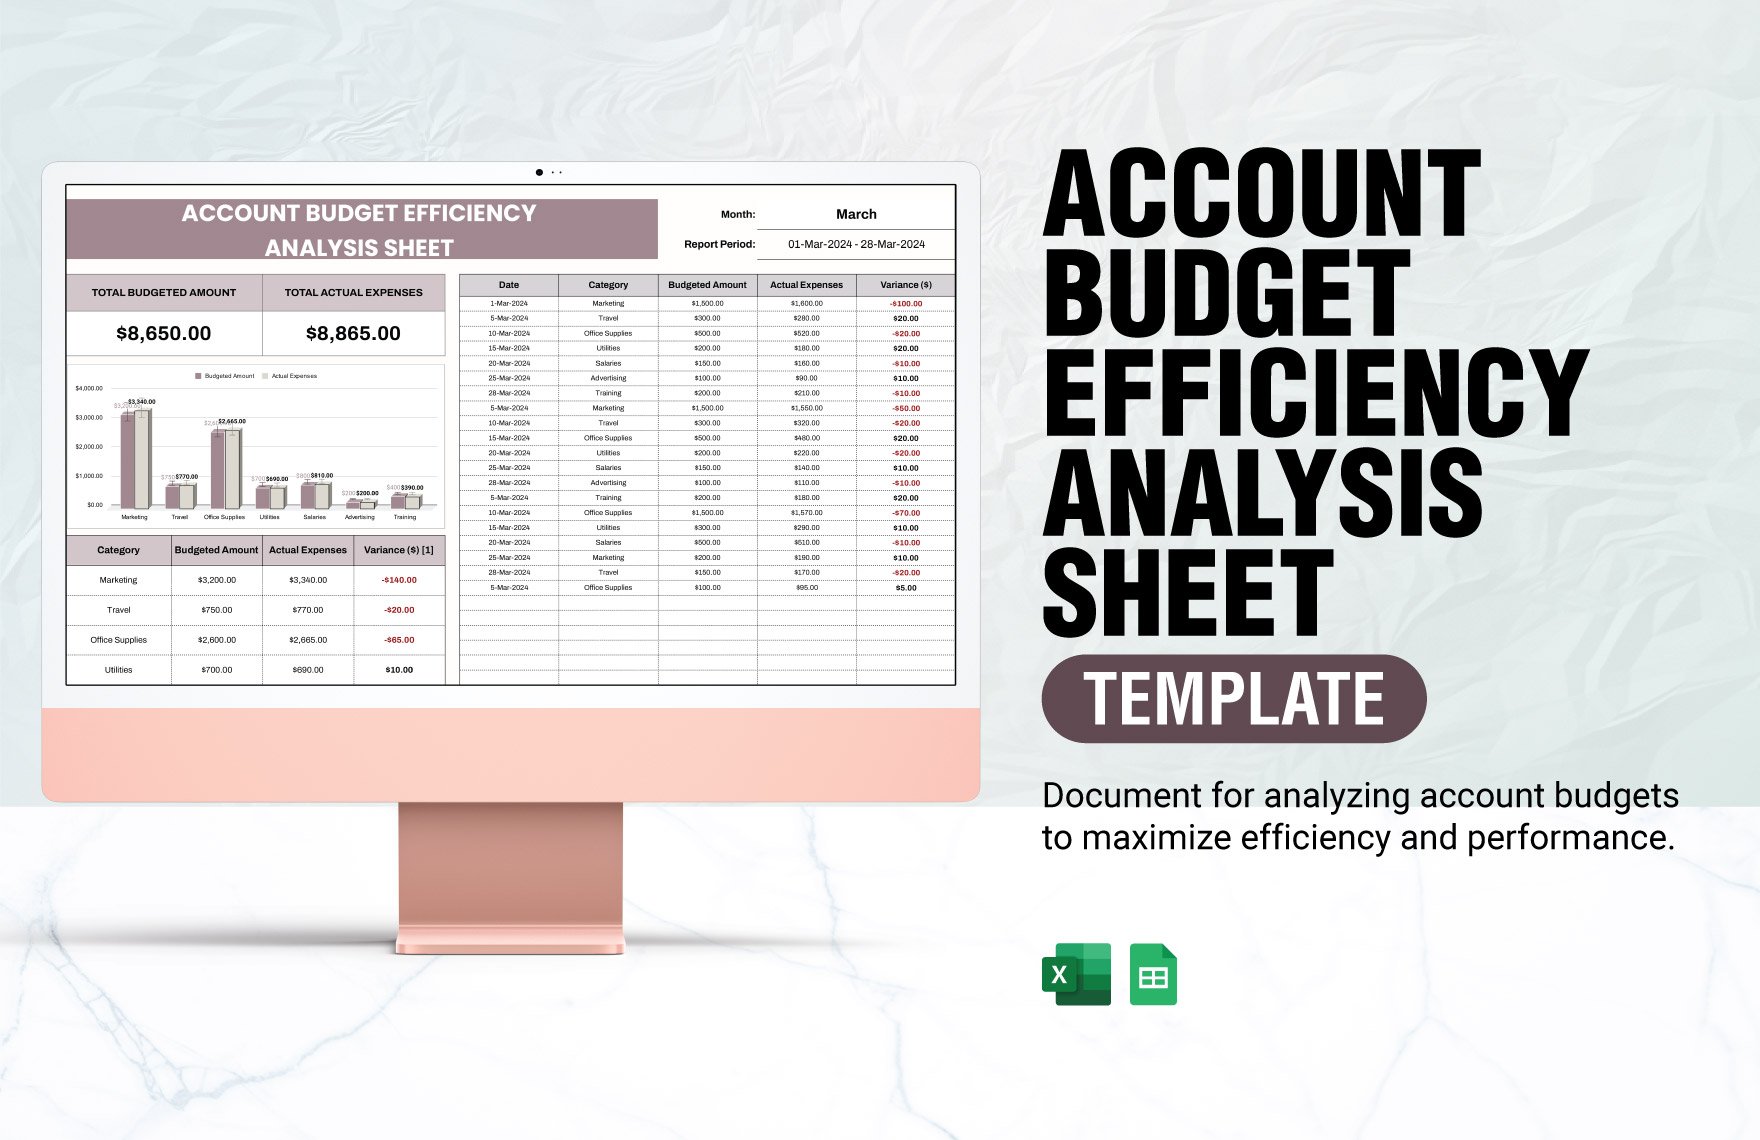 Account Budget Efficiency Analysis Sheet Template in Excel, Google Sheets